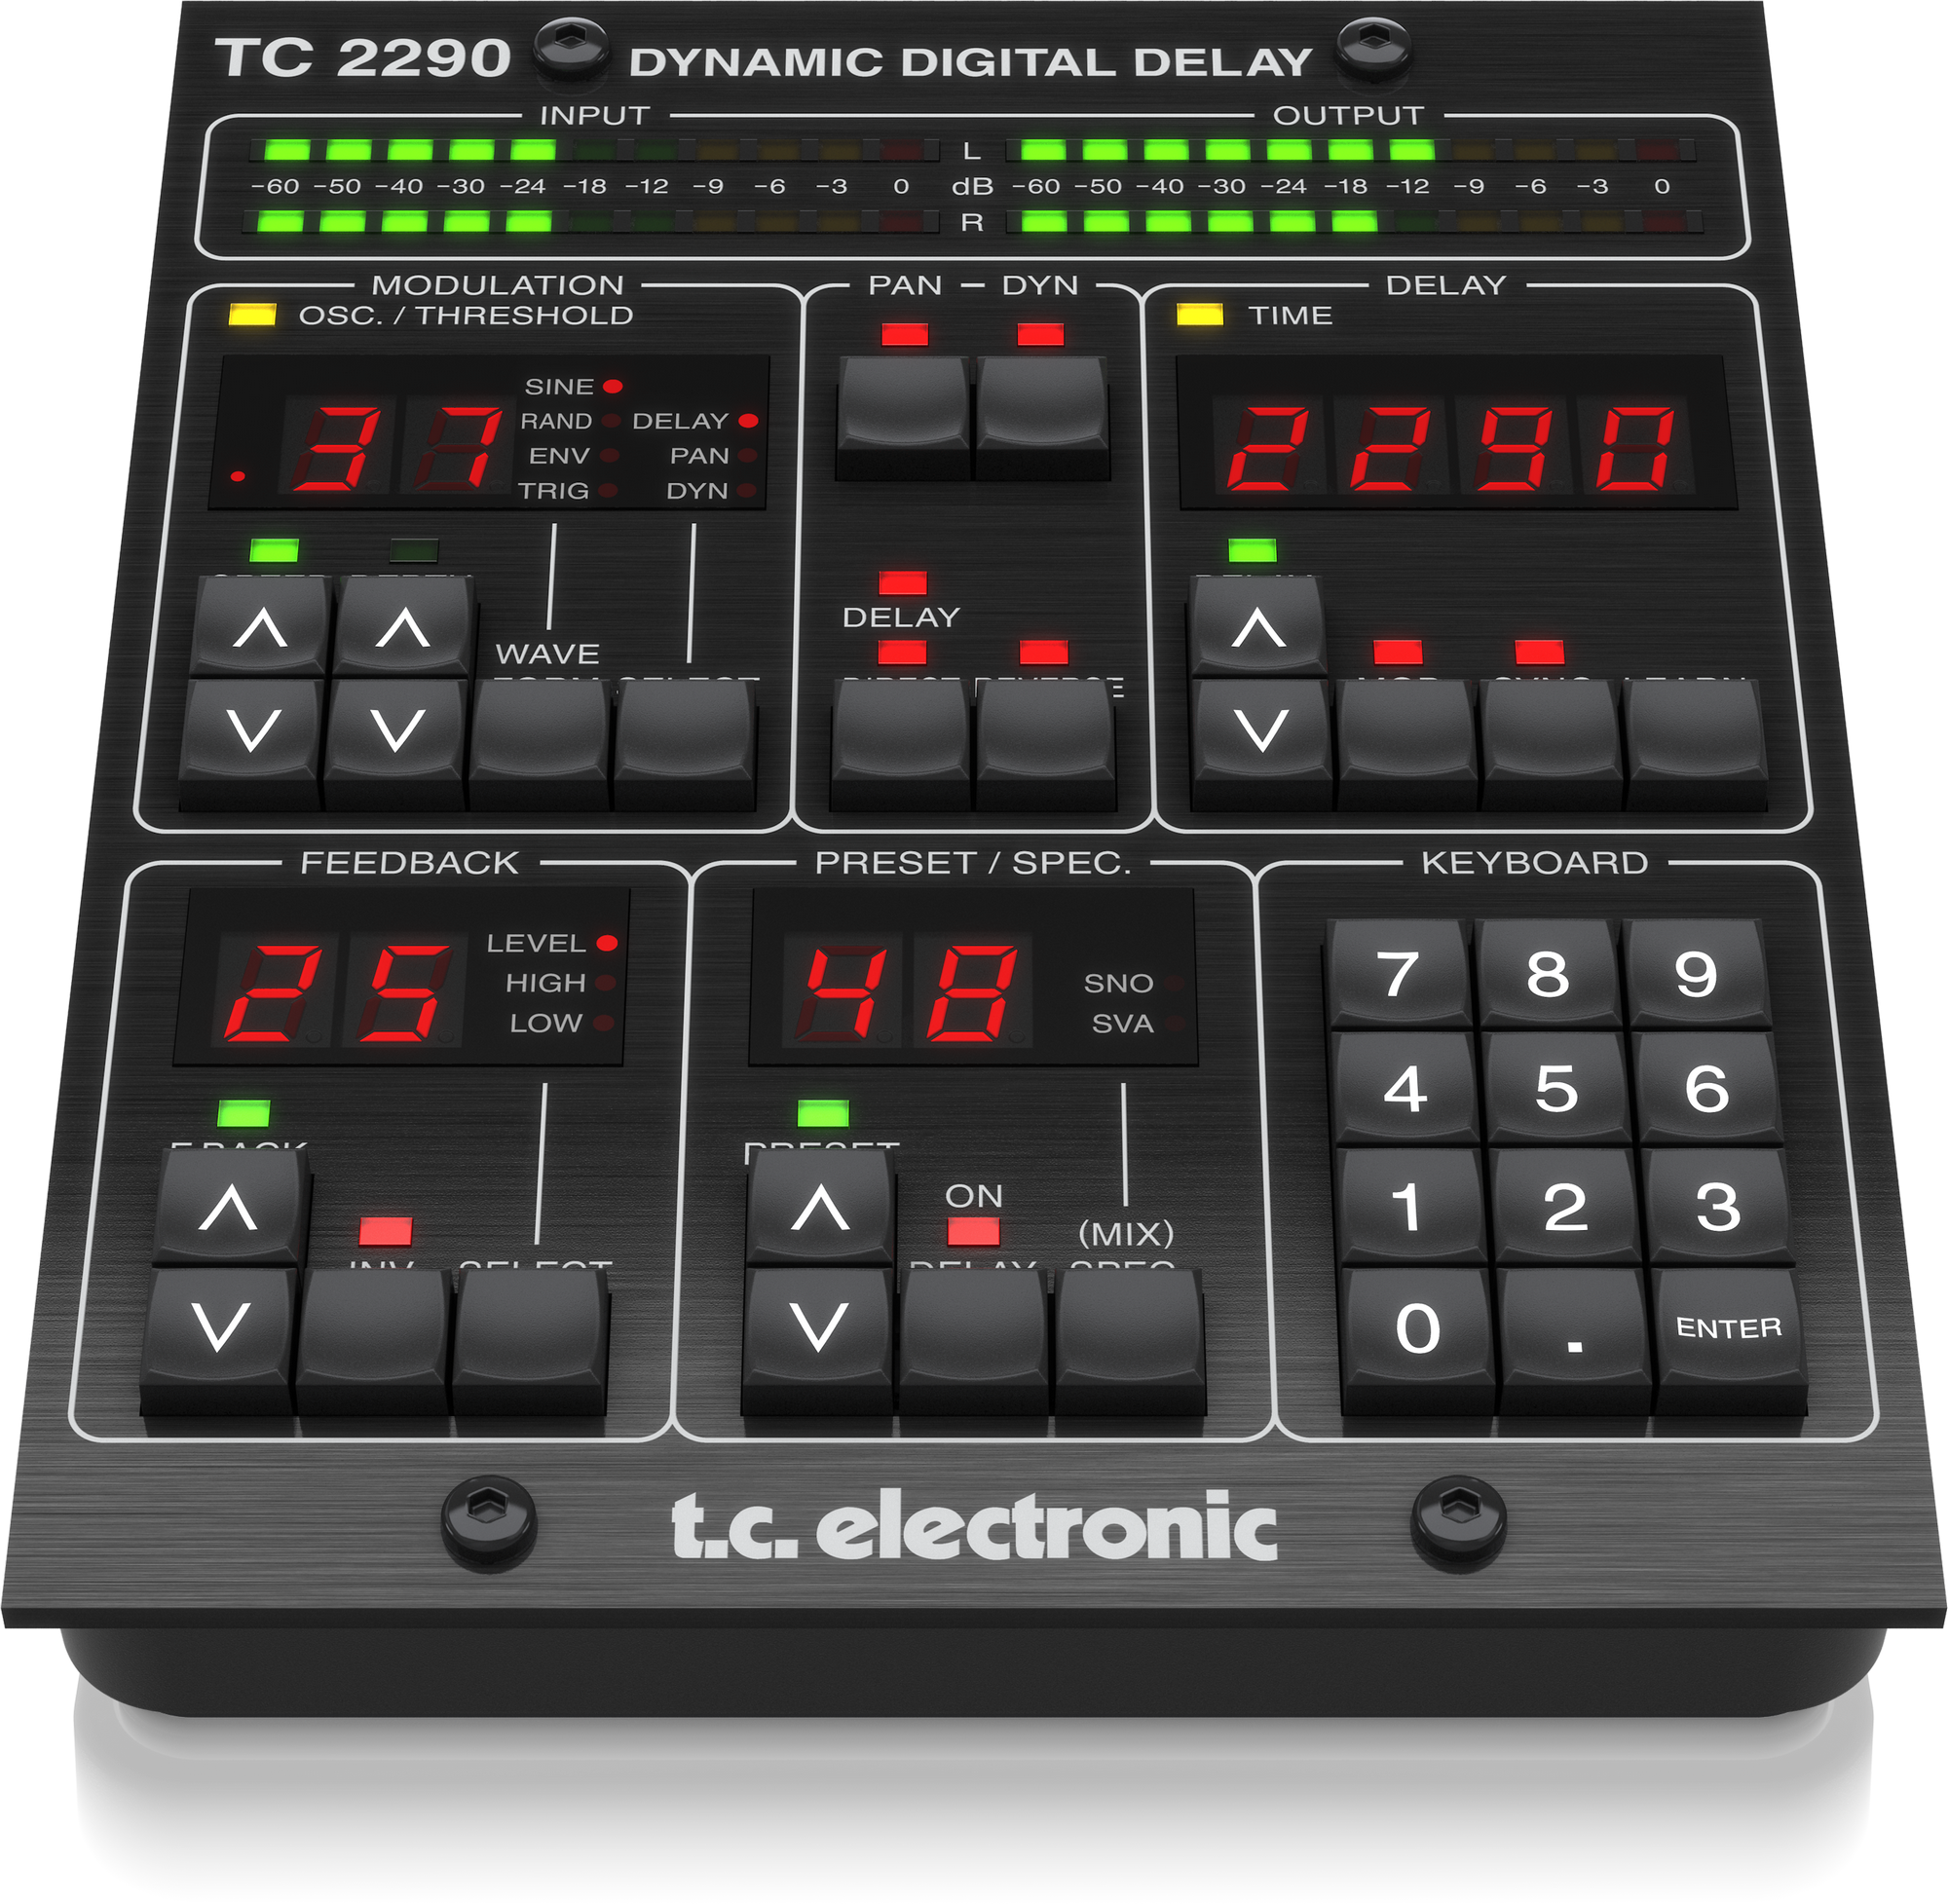 TC Electronic TC2290-DT Legendary Dynamic Delay Plug-in With Optional Hardware Desktop Controller And Signature Presets, TC ELECTRONIC, AUDIO PROCESSOR, tc-electronic-audio-processor-tc-tc2290-dt, ZOSO MUSIC SDN BHD